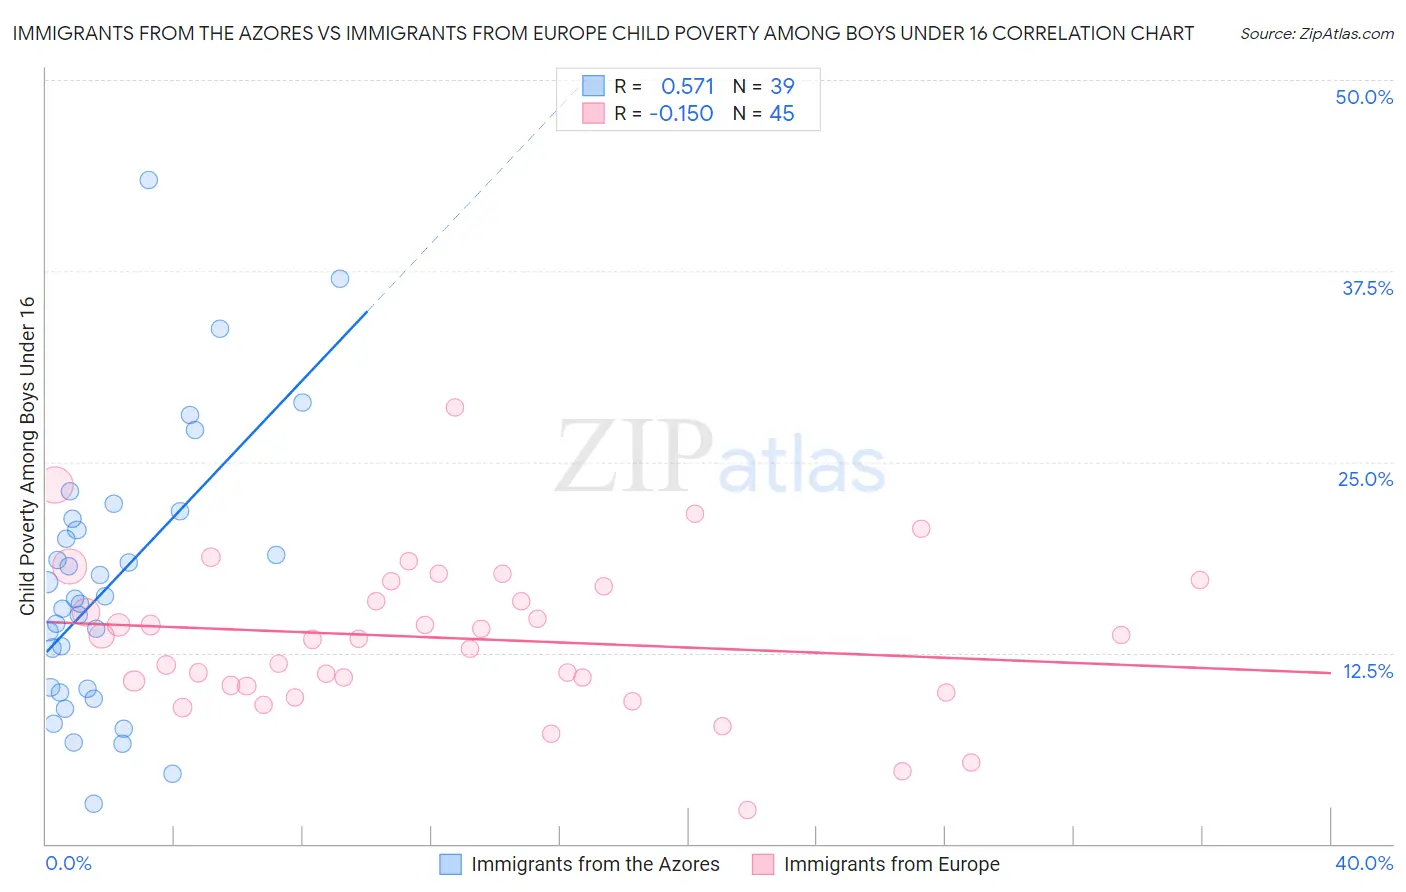 Immigrants from the Azores vs Immigrants from Europe Child Poverty Among Boys Under 16